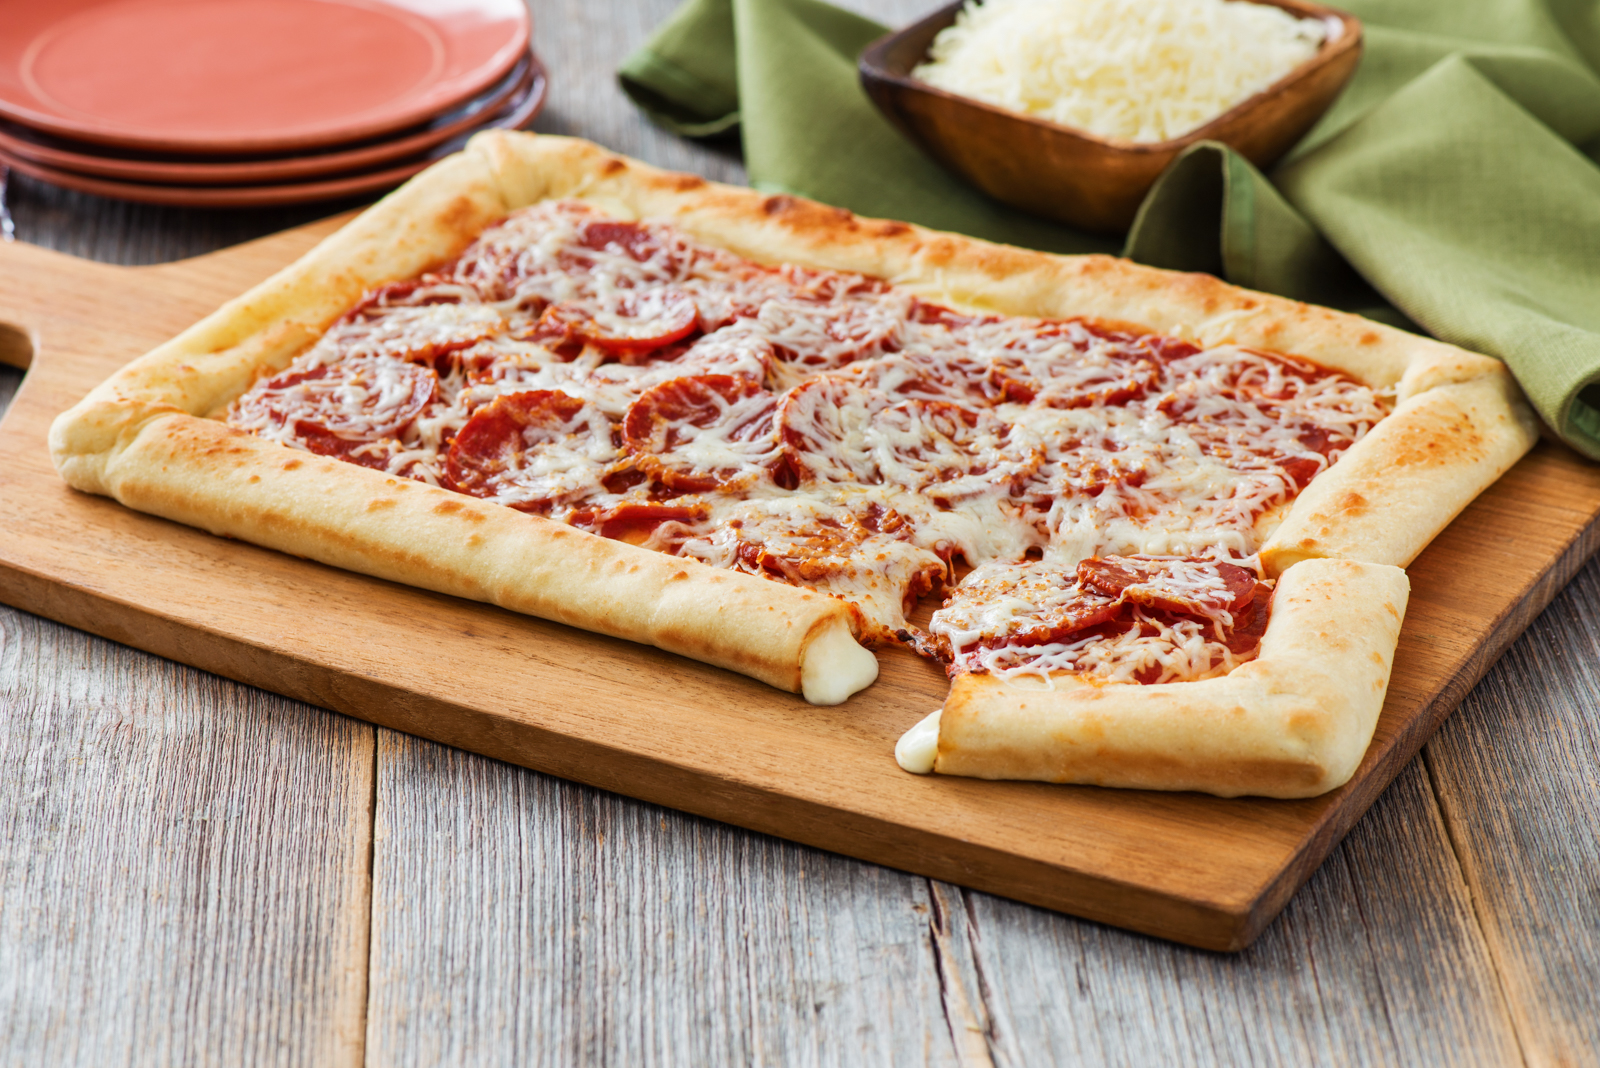 You can make your very own stuffed-crust pizza at home in a snap using Sarg...